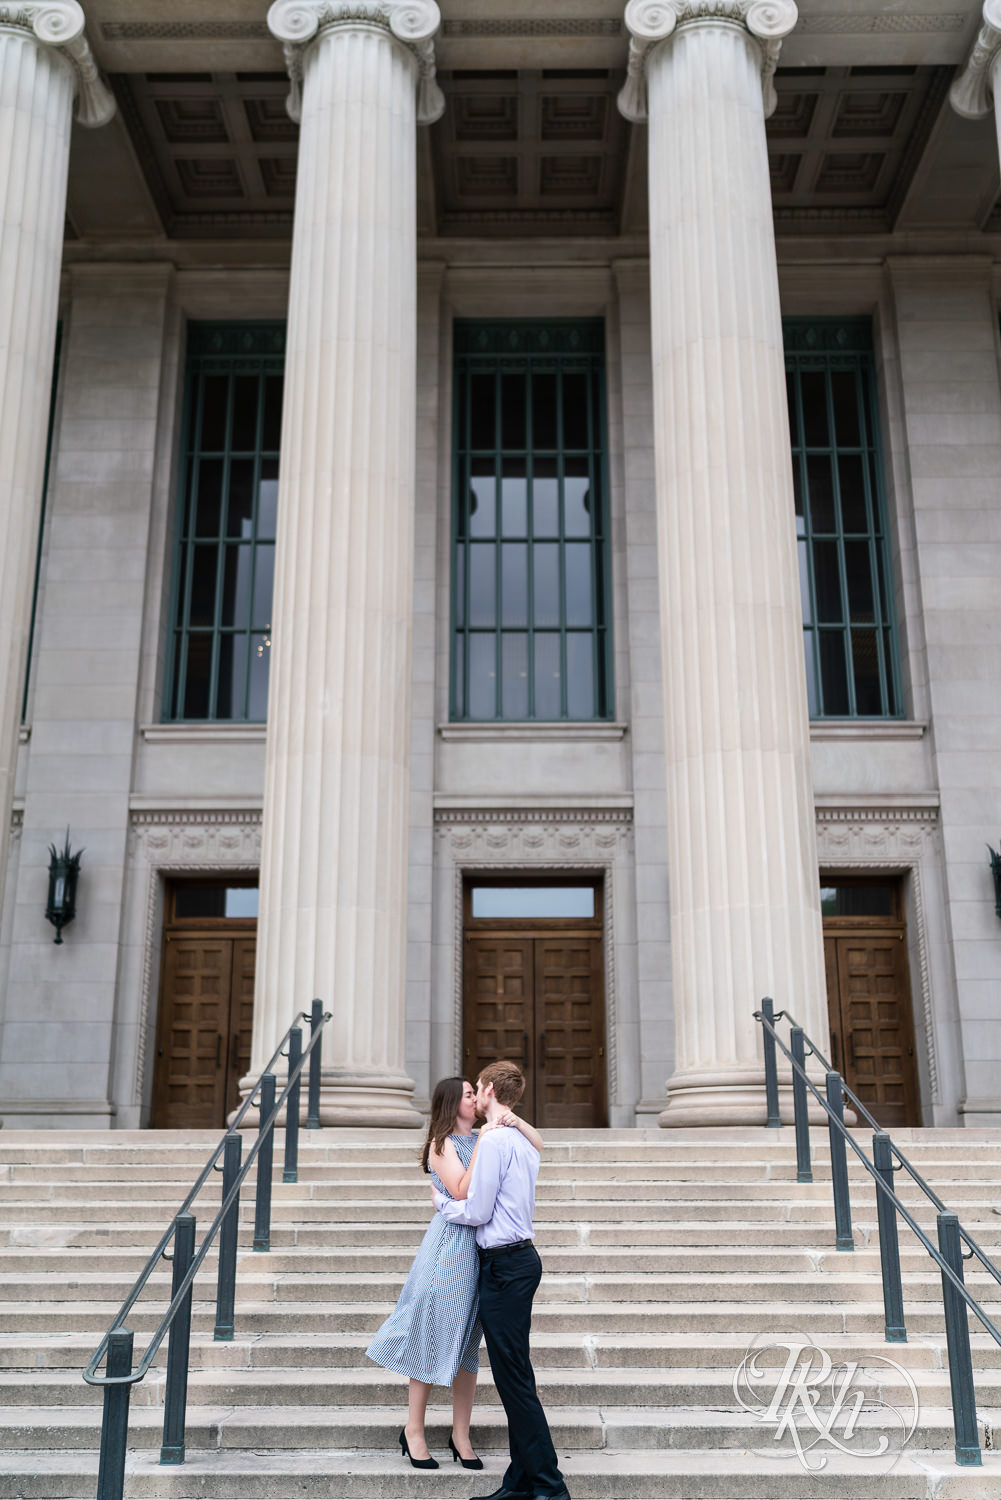 Man and woman kissing on stairs during engagement session at University of Minnesota.